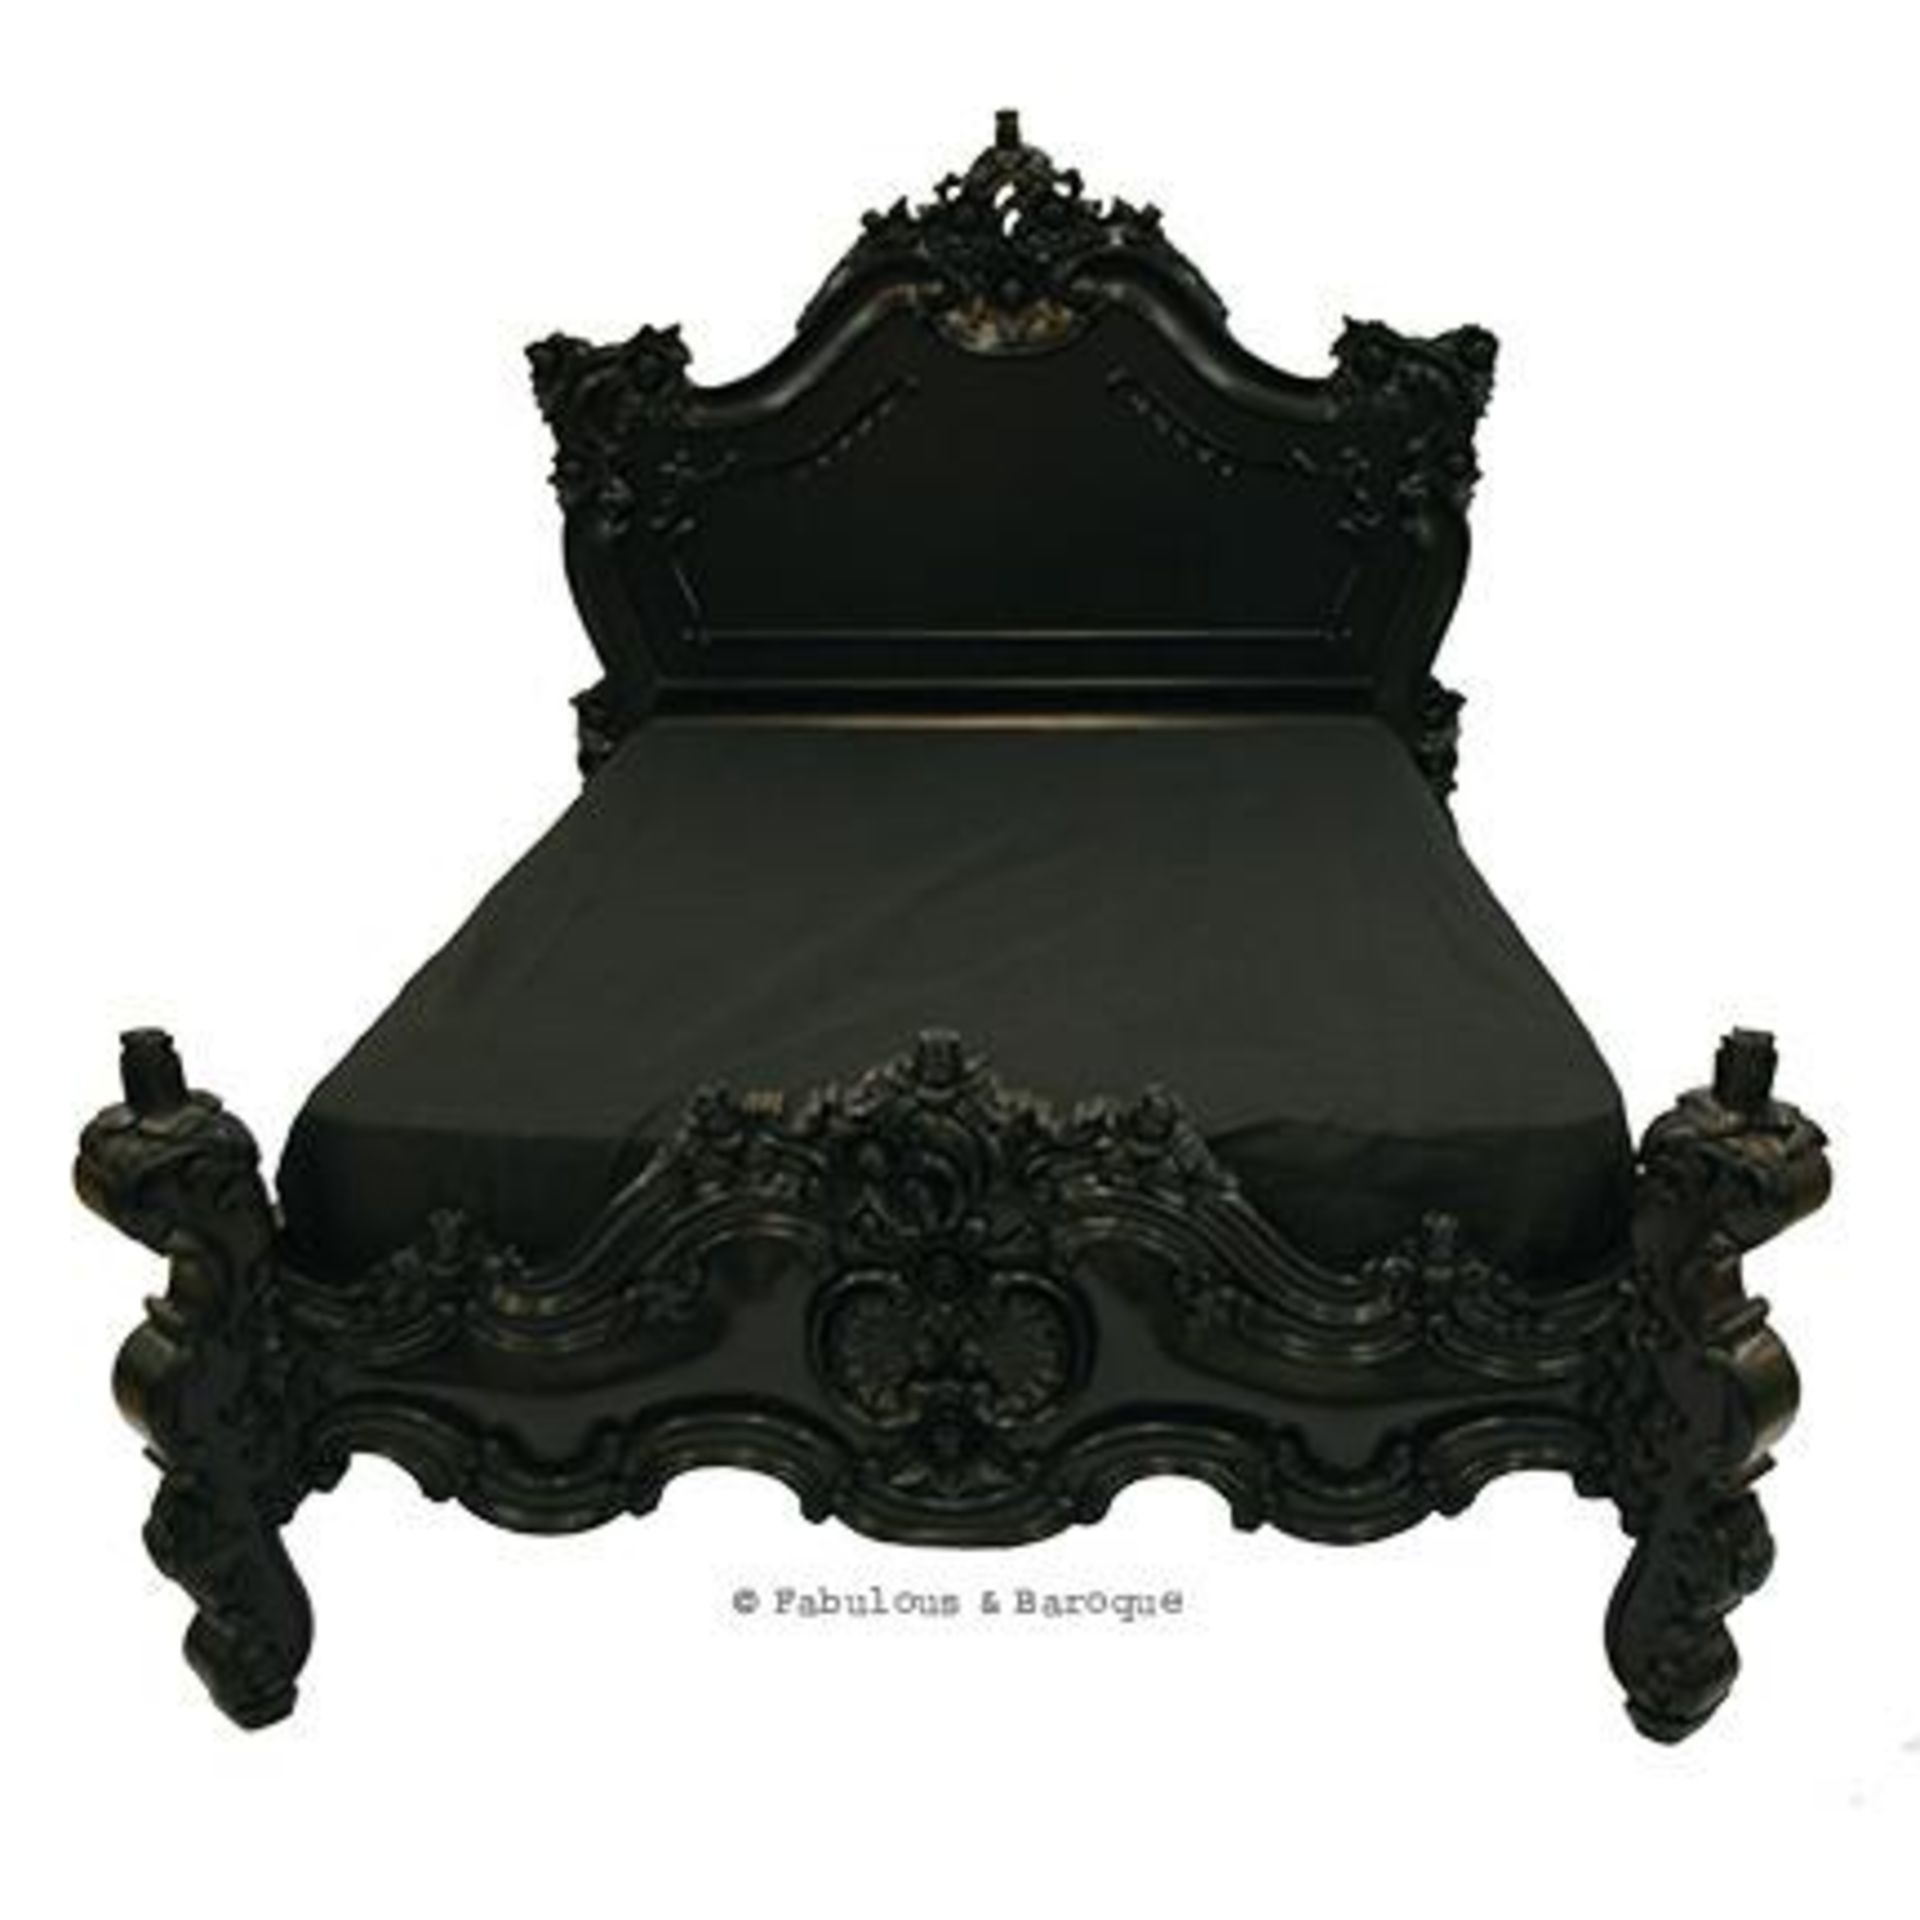 King Size 5' Royal Fortune Montespan Bed - Image 5 of 6